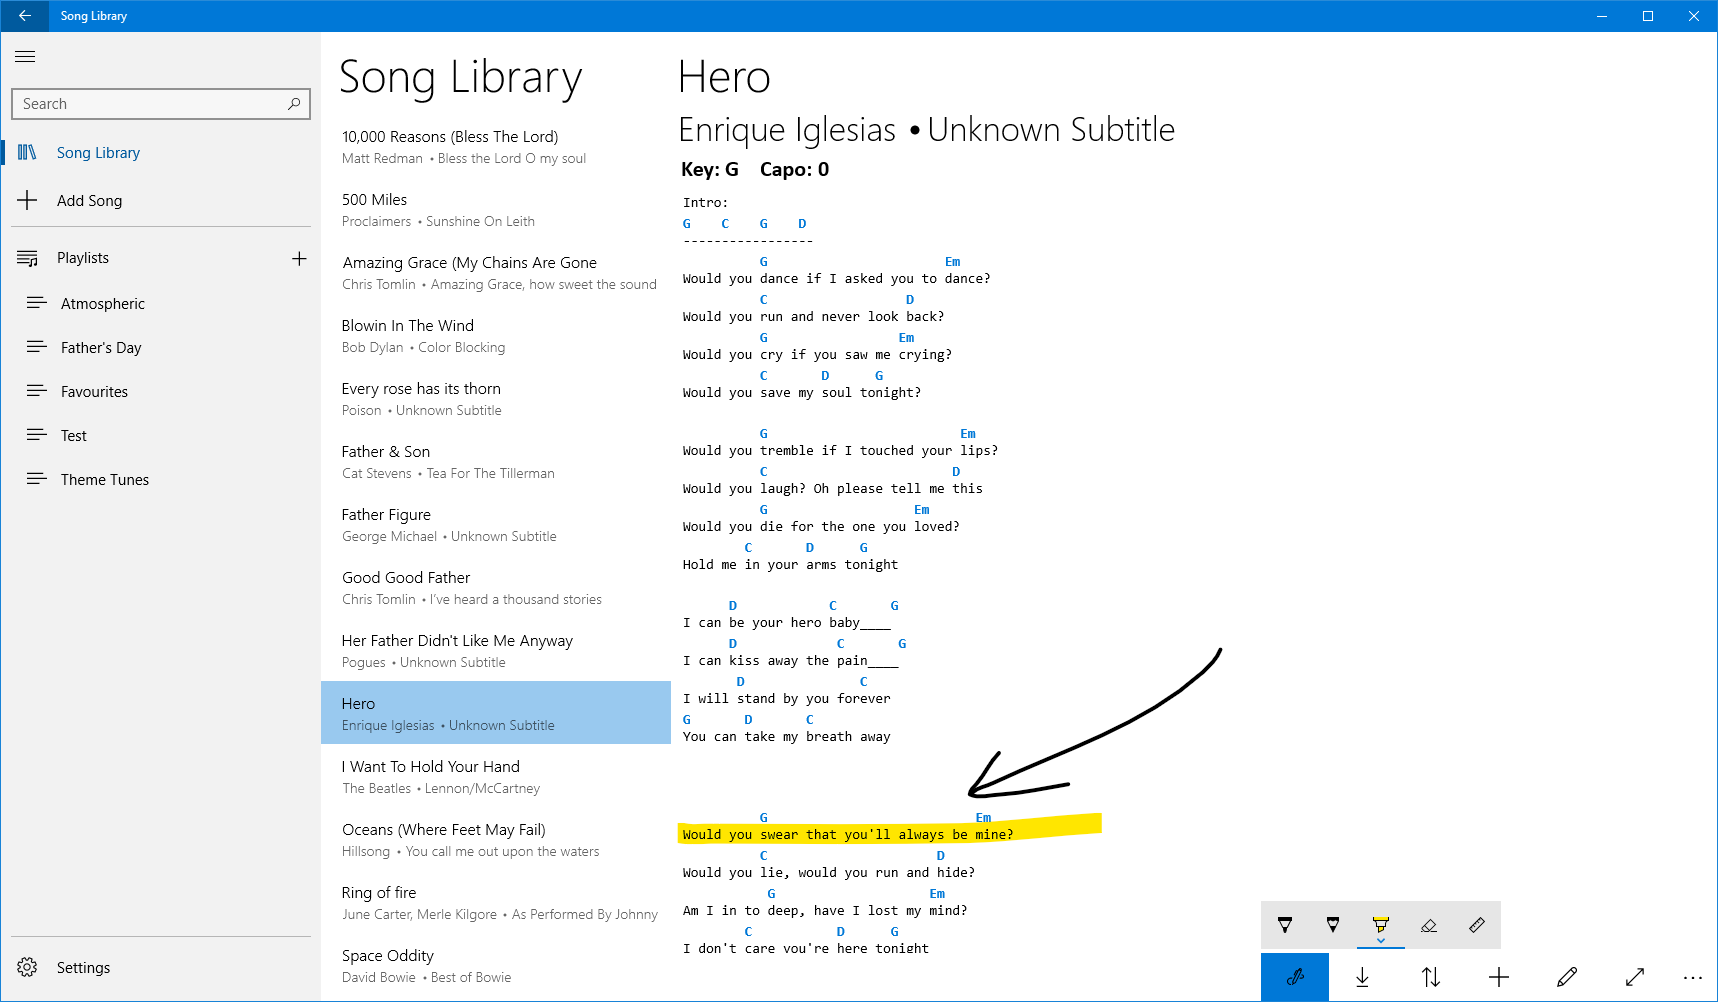 Annotate your songs using Windows Ink